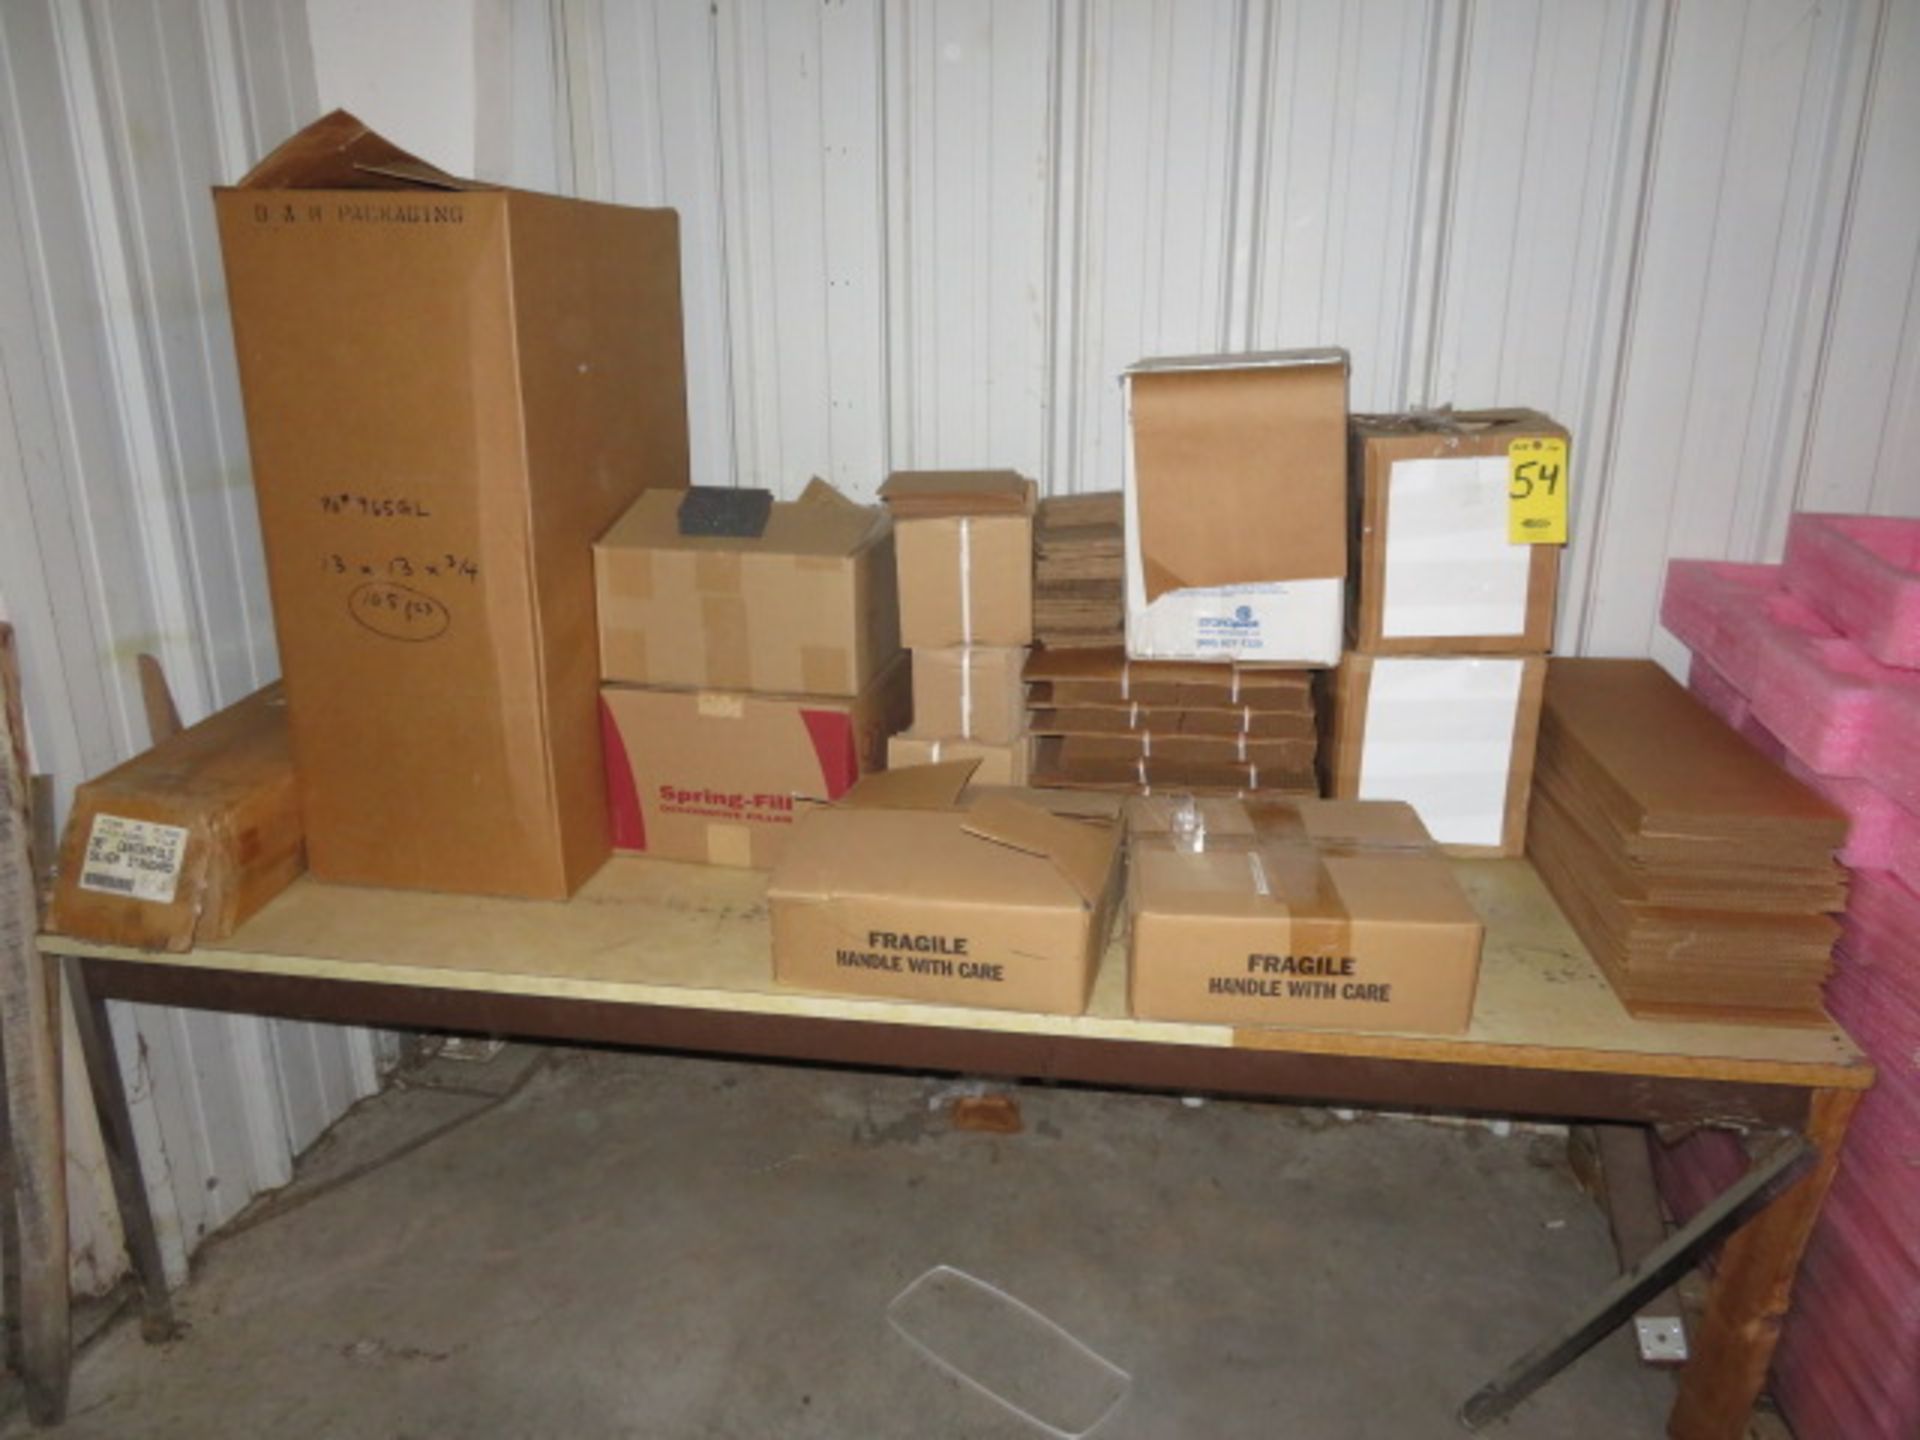 ASST PACKAGING-13 X 13 X 4 FOAM SQUARES, CRO-NEL DISP. BOX, CORRUGATED & CLAY LINER SHEETS...